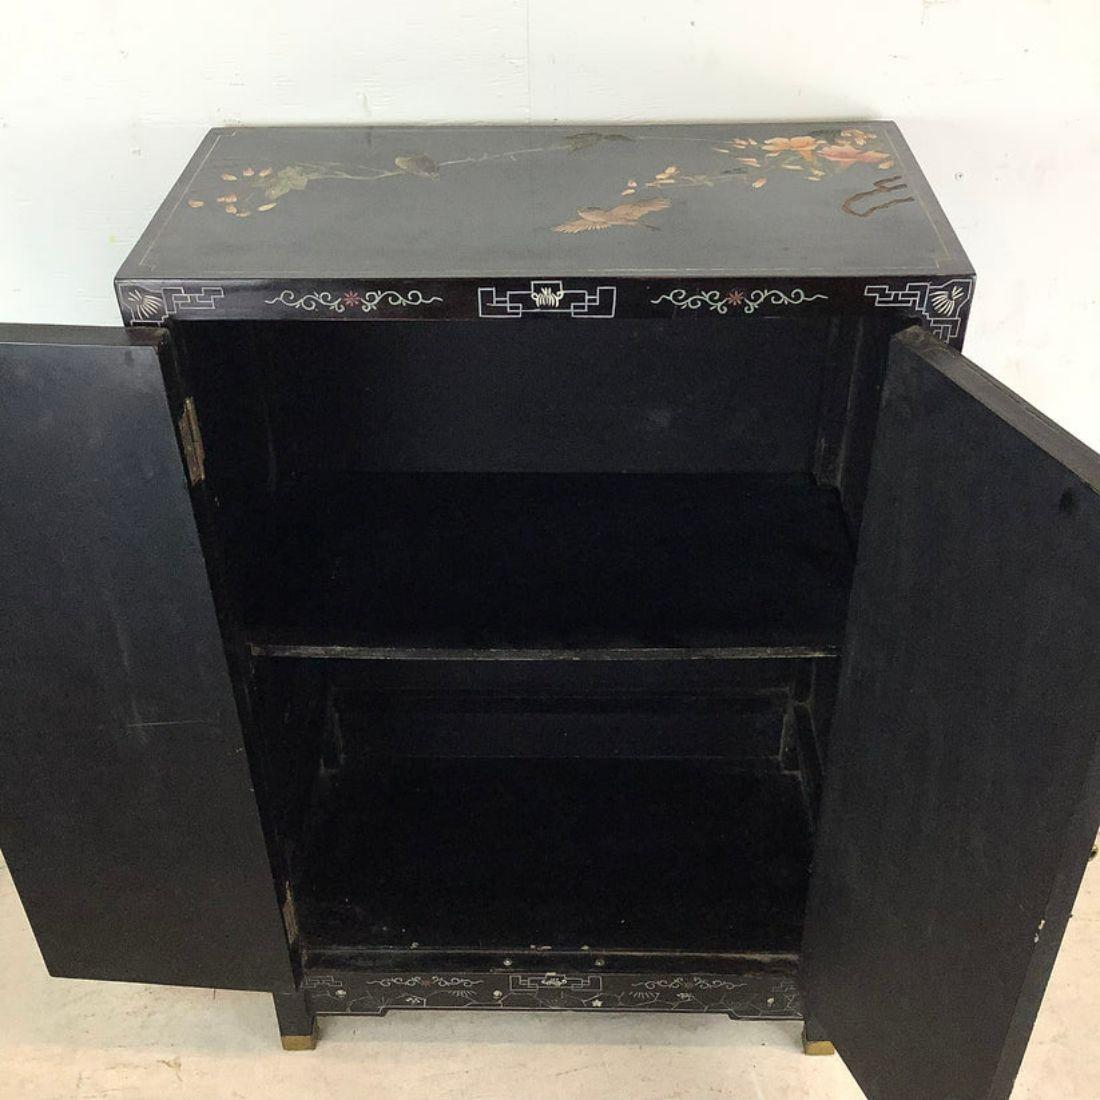 This striking Asian modern storage cabinet features black lacquer finish with illustrated designs and inlays. The decorative nature of this ample sized cabinet makes it an impressive addition to any setting while the shelved interior makes this a